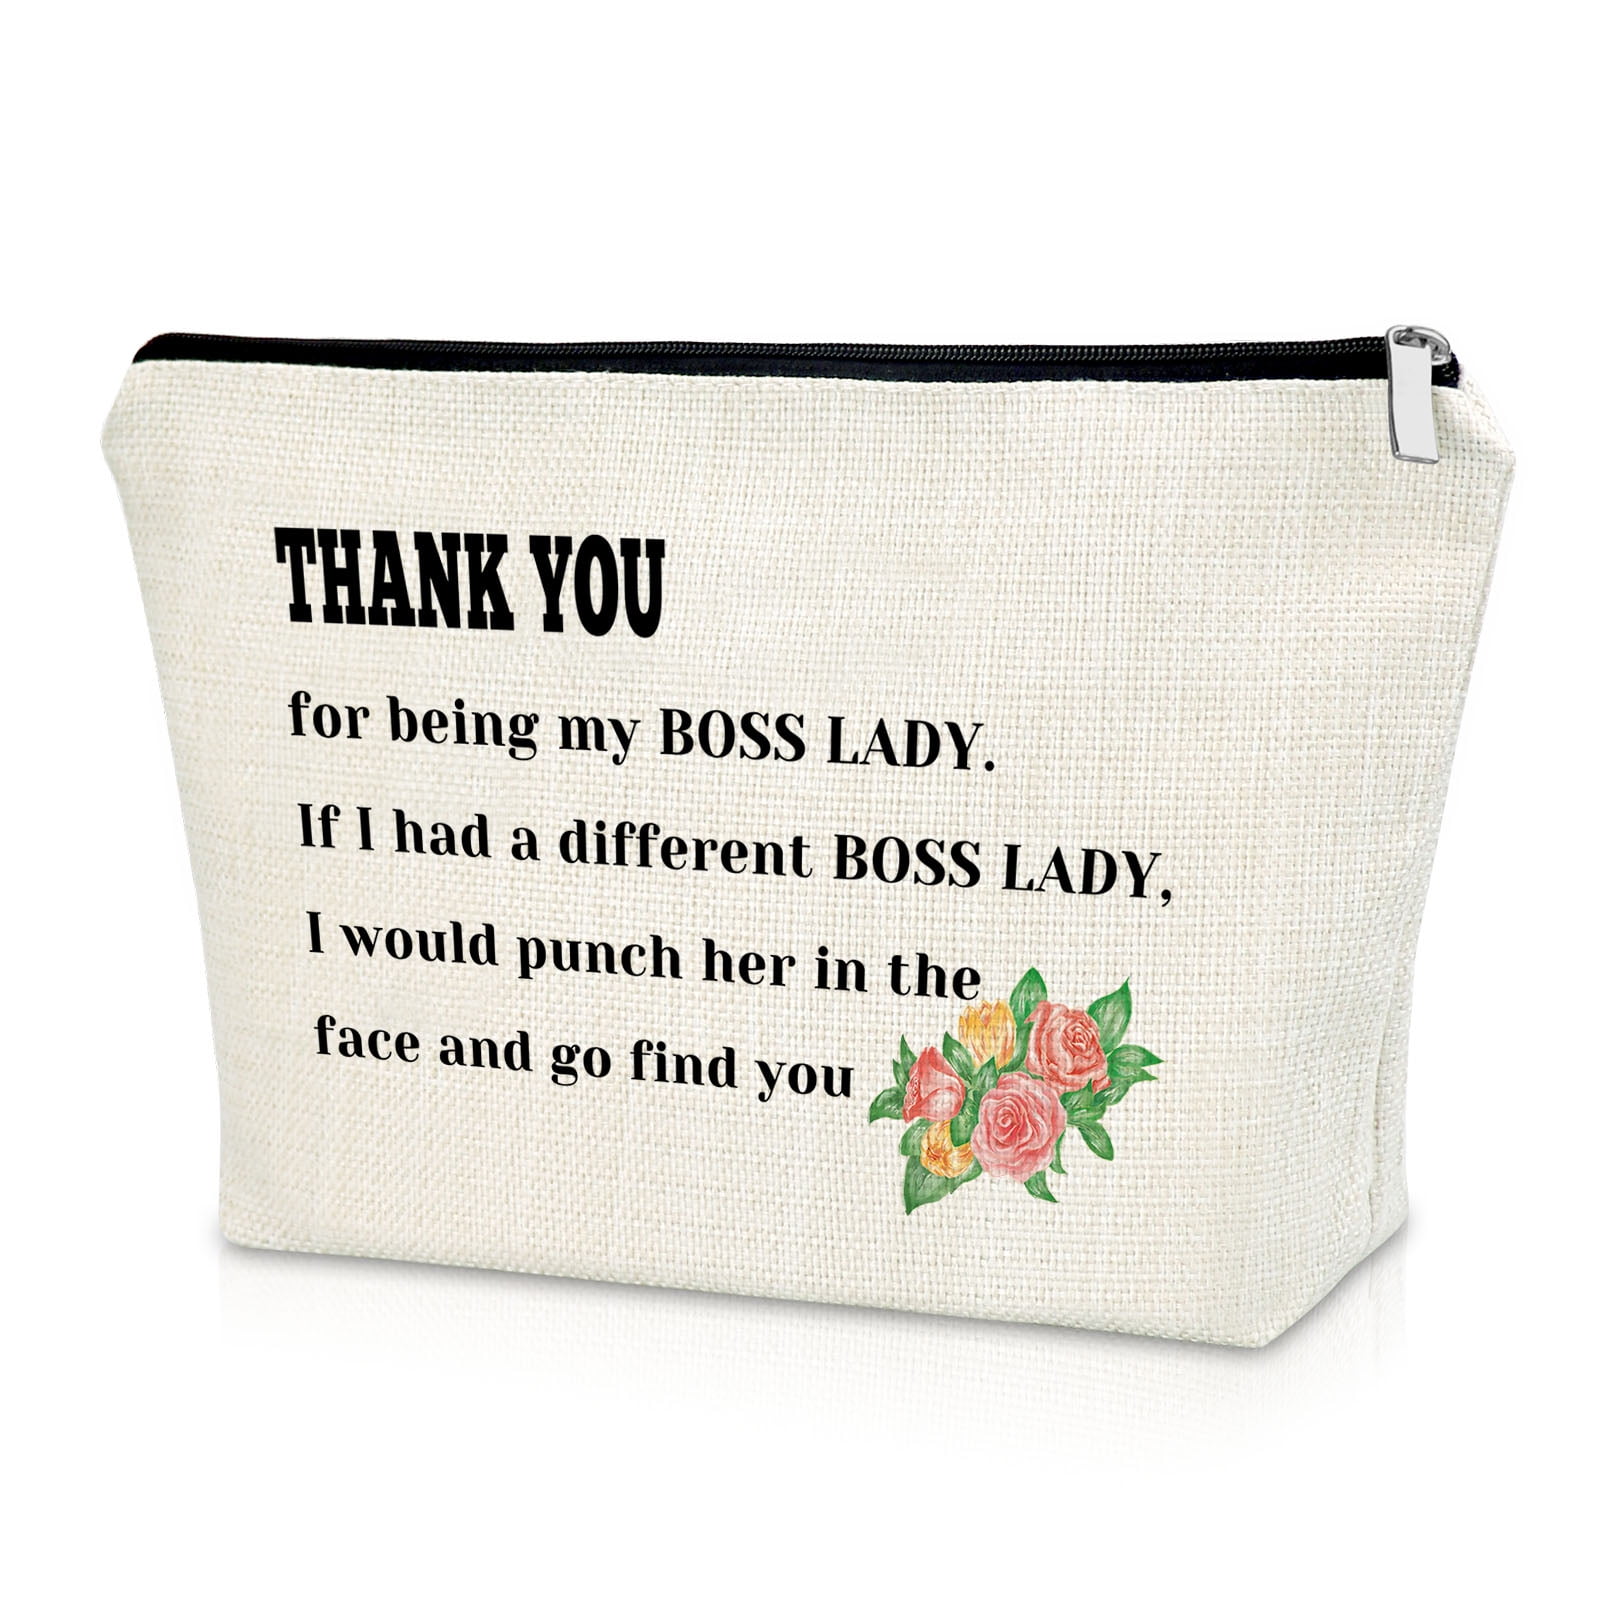 Geiserailie Christmas Gift Spa Set Boss Lady Gifts for Women Spa Tumbler  Relaxation Gift Set, Thank You for Being My Boss Lady Makeup Bag, Birthday